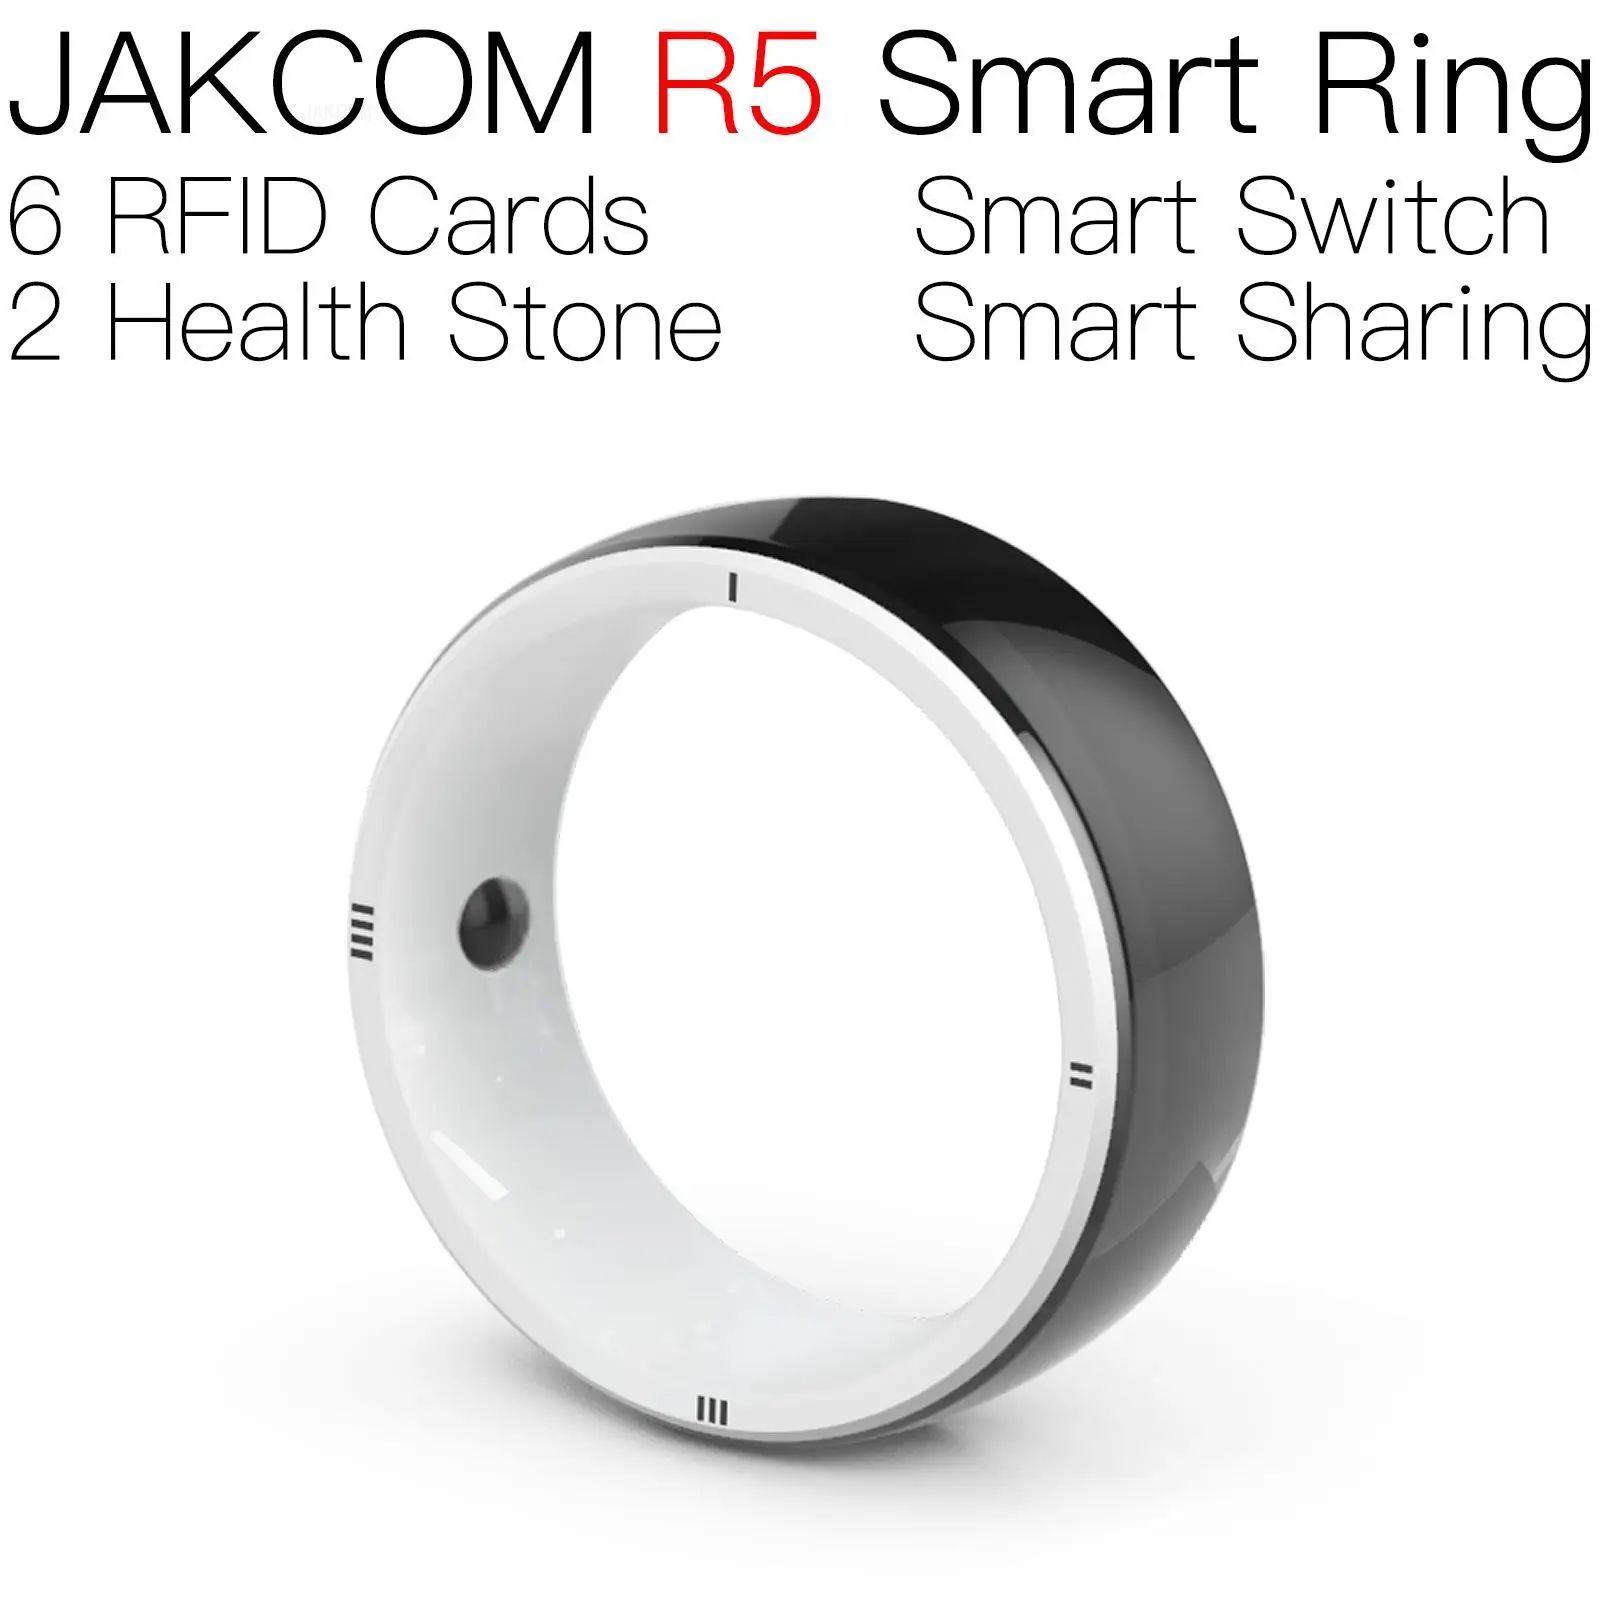 

JAKCOM R5 Smart Ring Super value as uid rfid micro nfc tag 4x12mm classic changeable led 1k s50 change welding machine